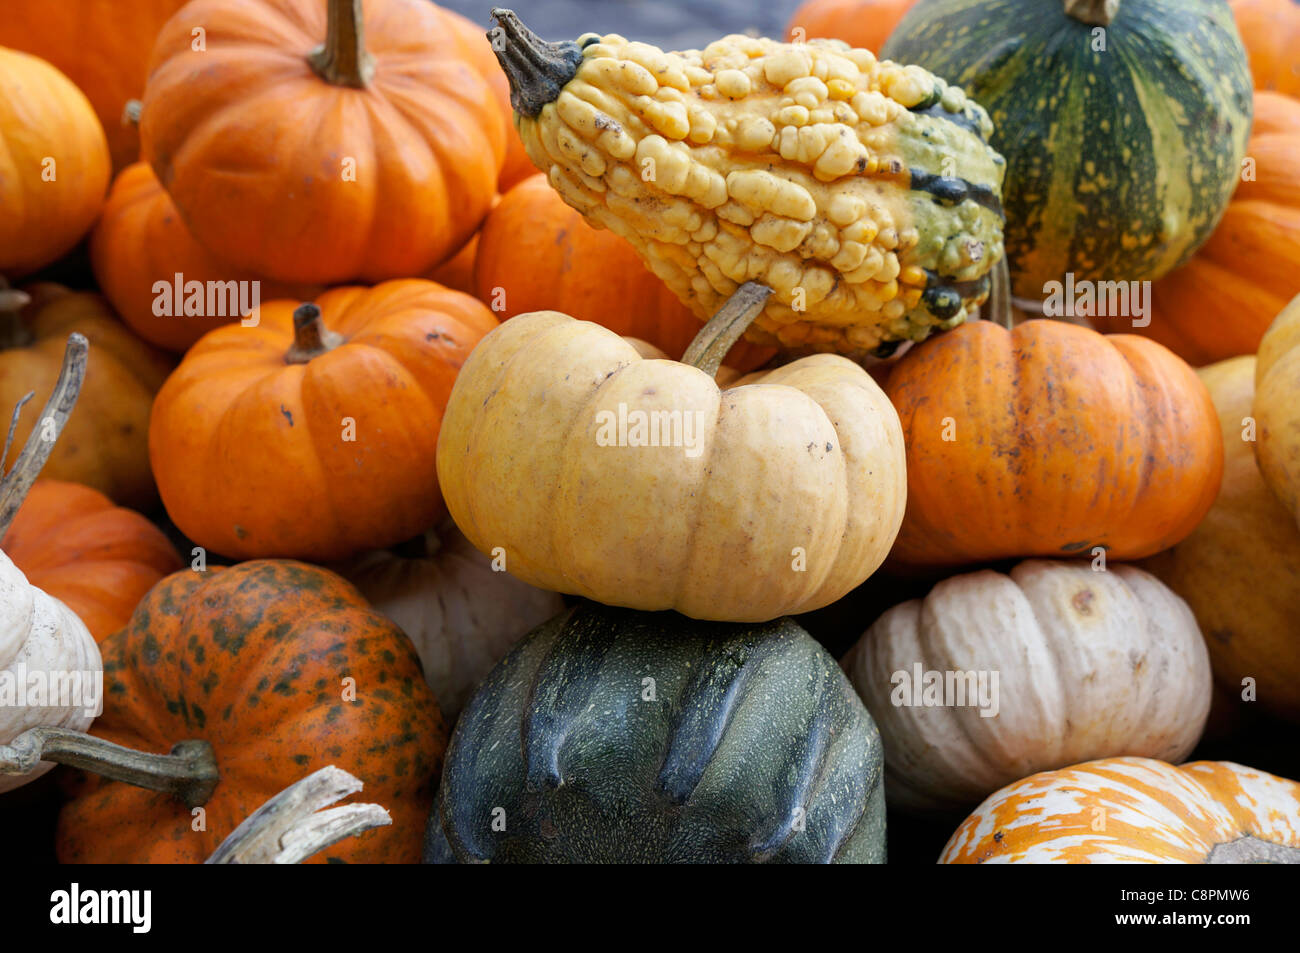 Pumpkins and Squashes, Variety of Vegetable Squashes Stock Photo